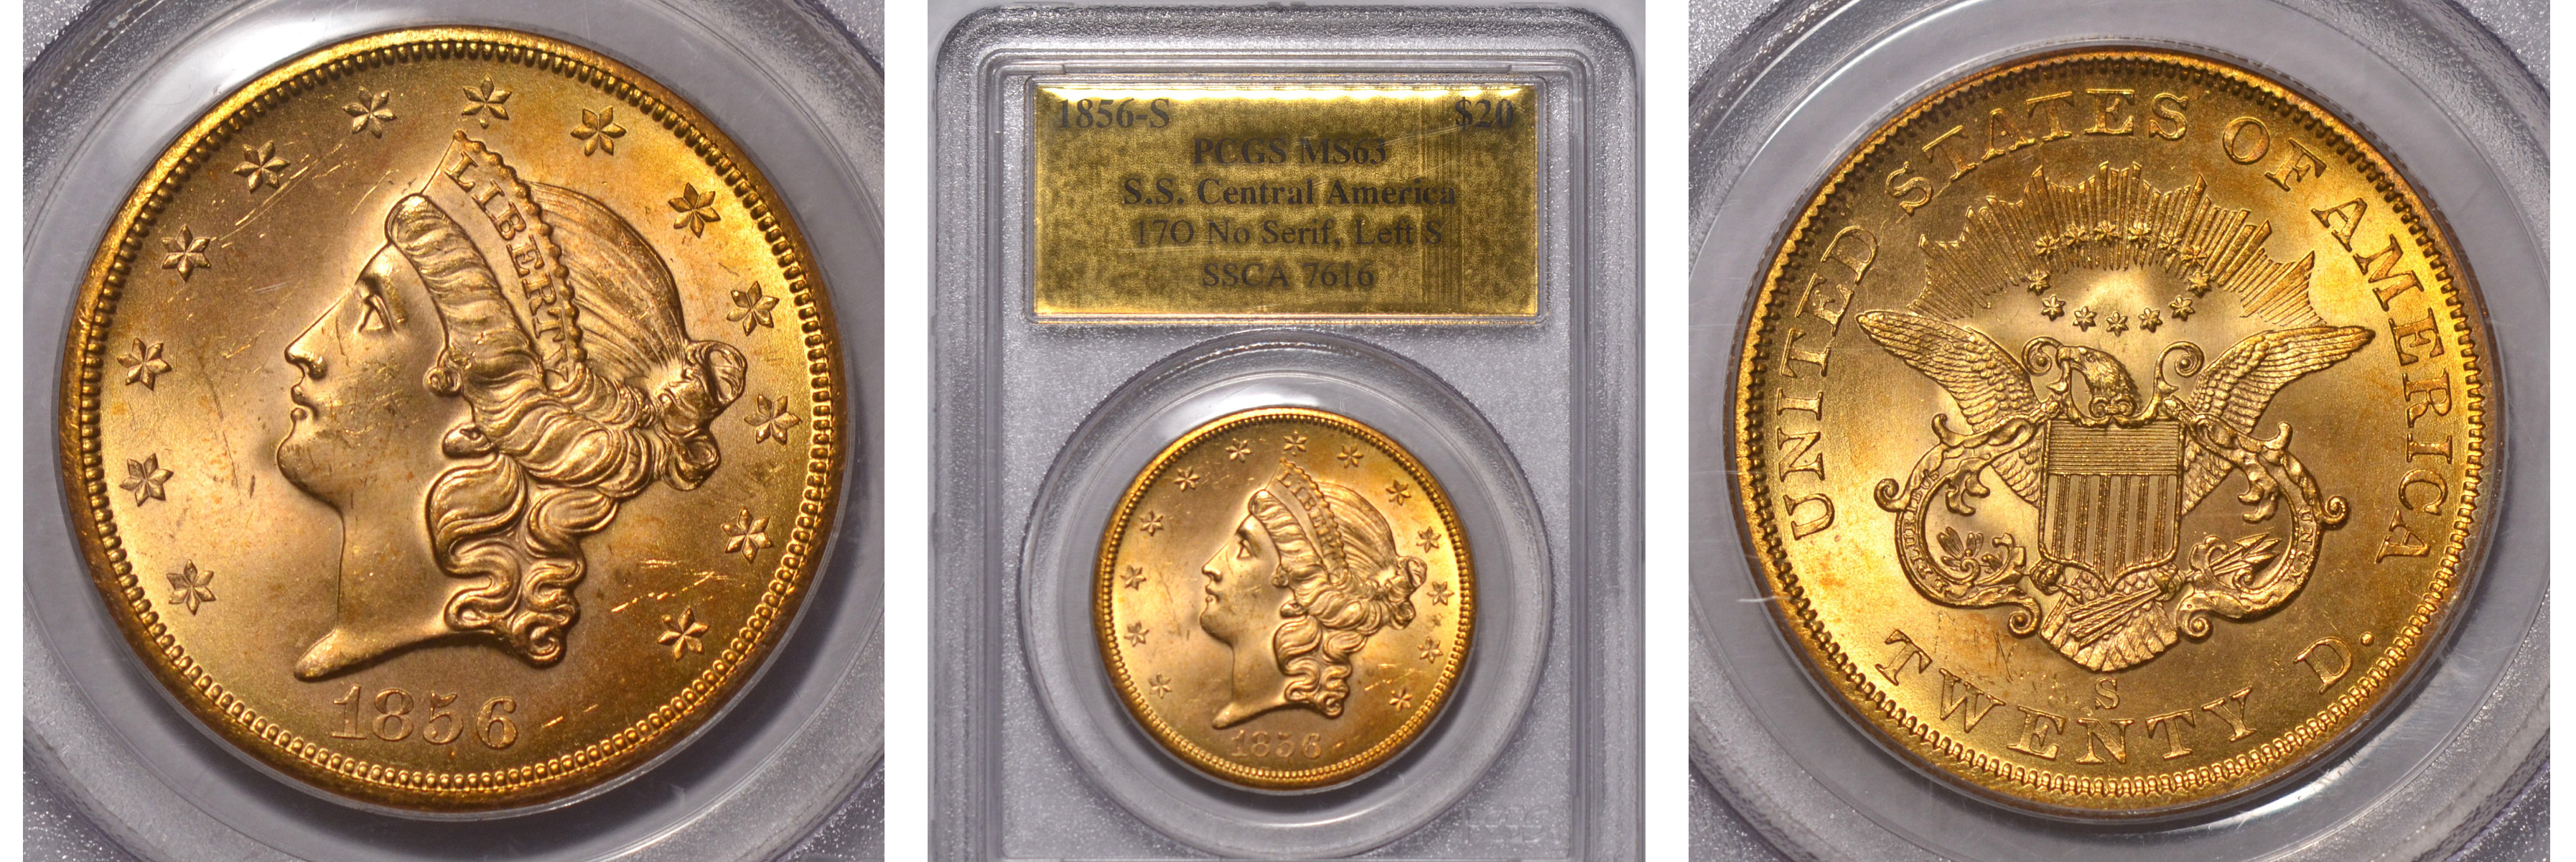 1856-S SSCA Gold $20 Double Eagle PCGS MS63